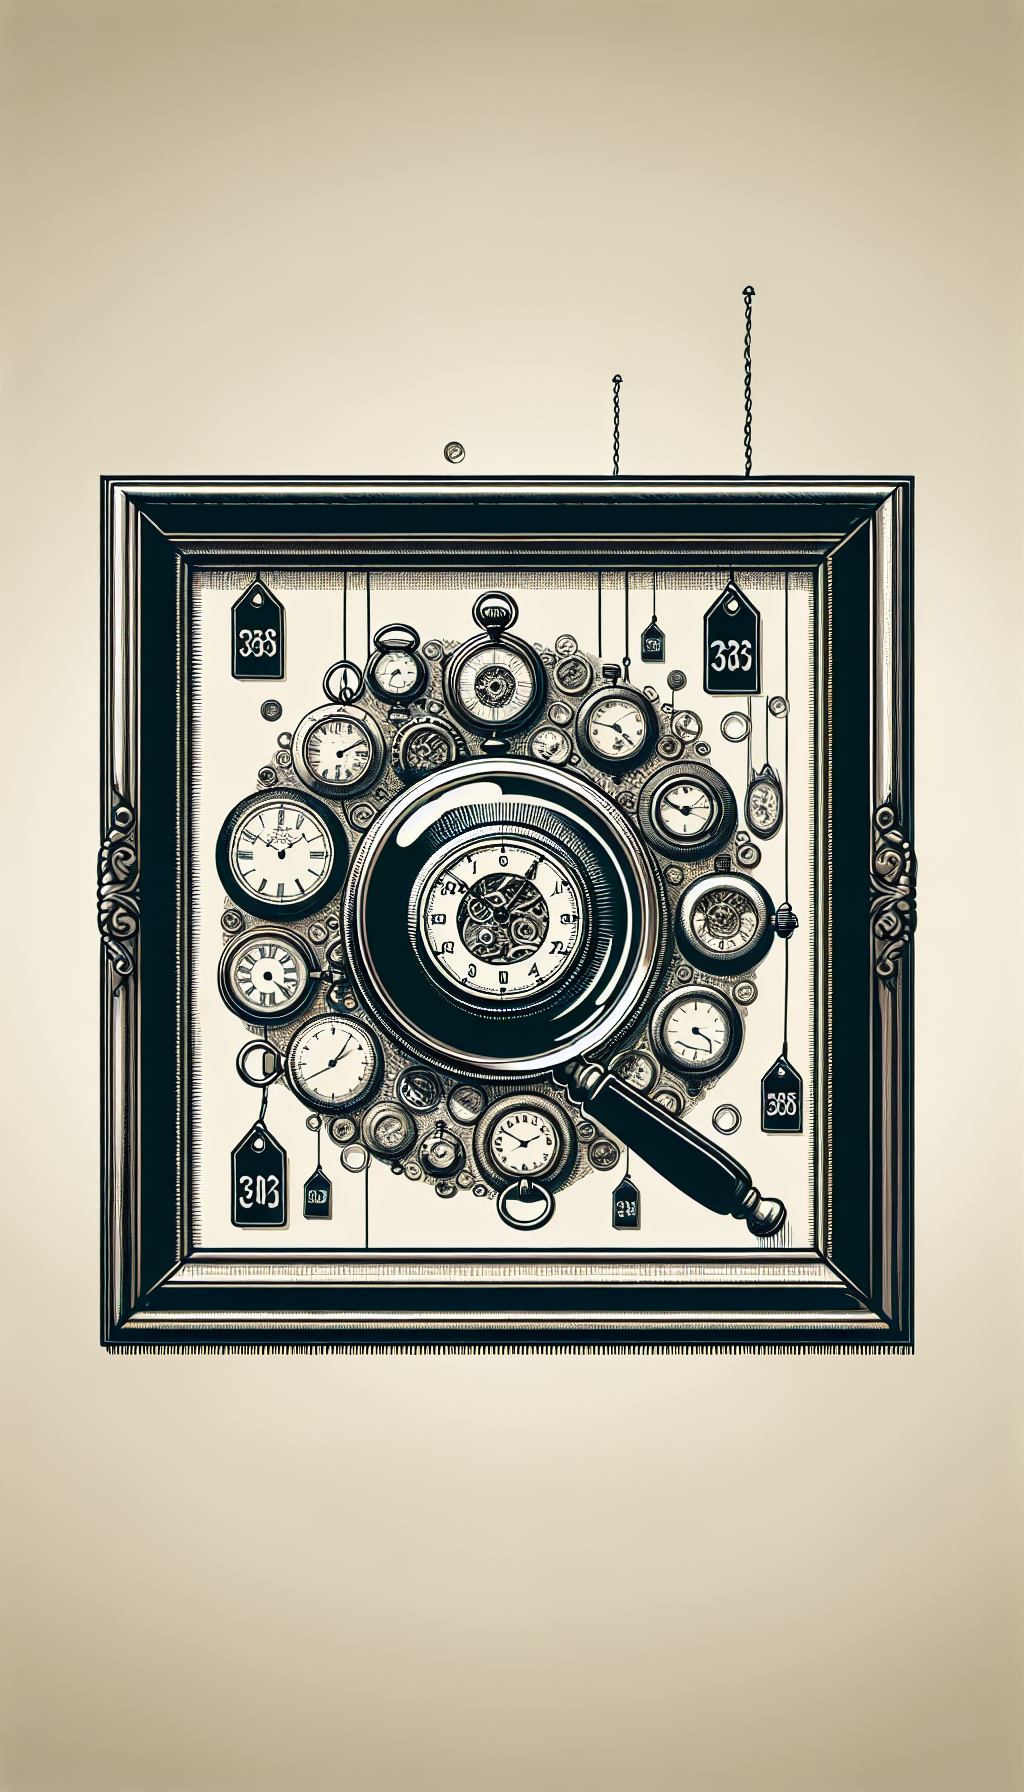 An illustration depicts an elegant vintage pocket-watch-style frame, with Croton watches from different iconic periods serving as the numerals on a clock face. Each watch shines, echoing its era's signature design. In the center, a magnifying glass hovers over a Croton model, highlighting its intricate mechanisms with price tags floating upward, symbolizing the assessment of its value.